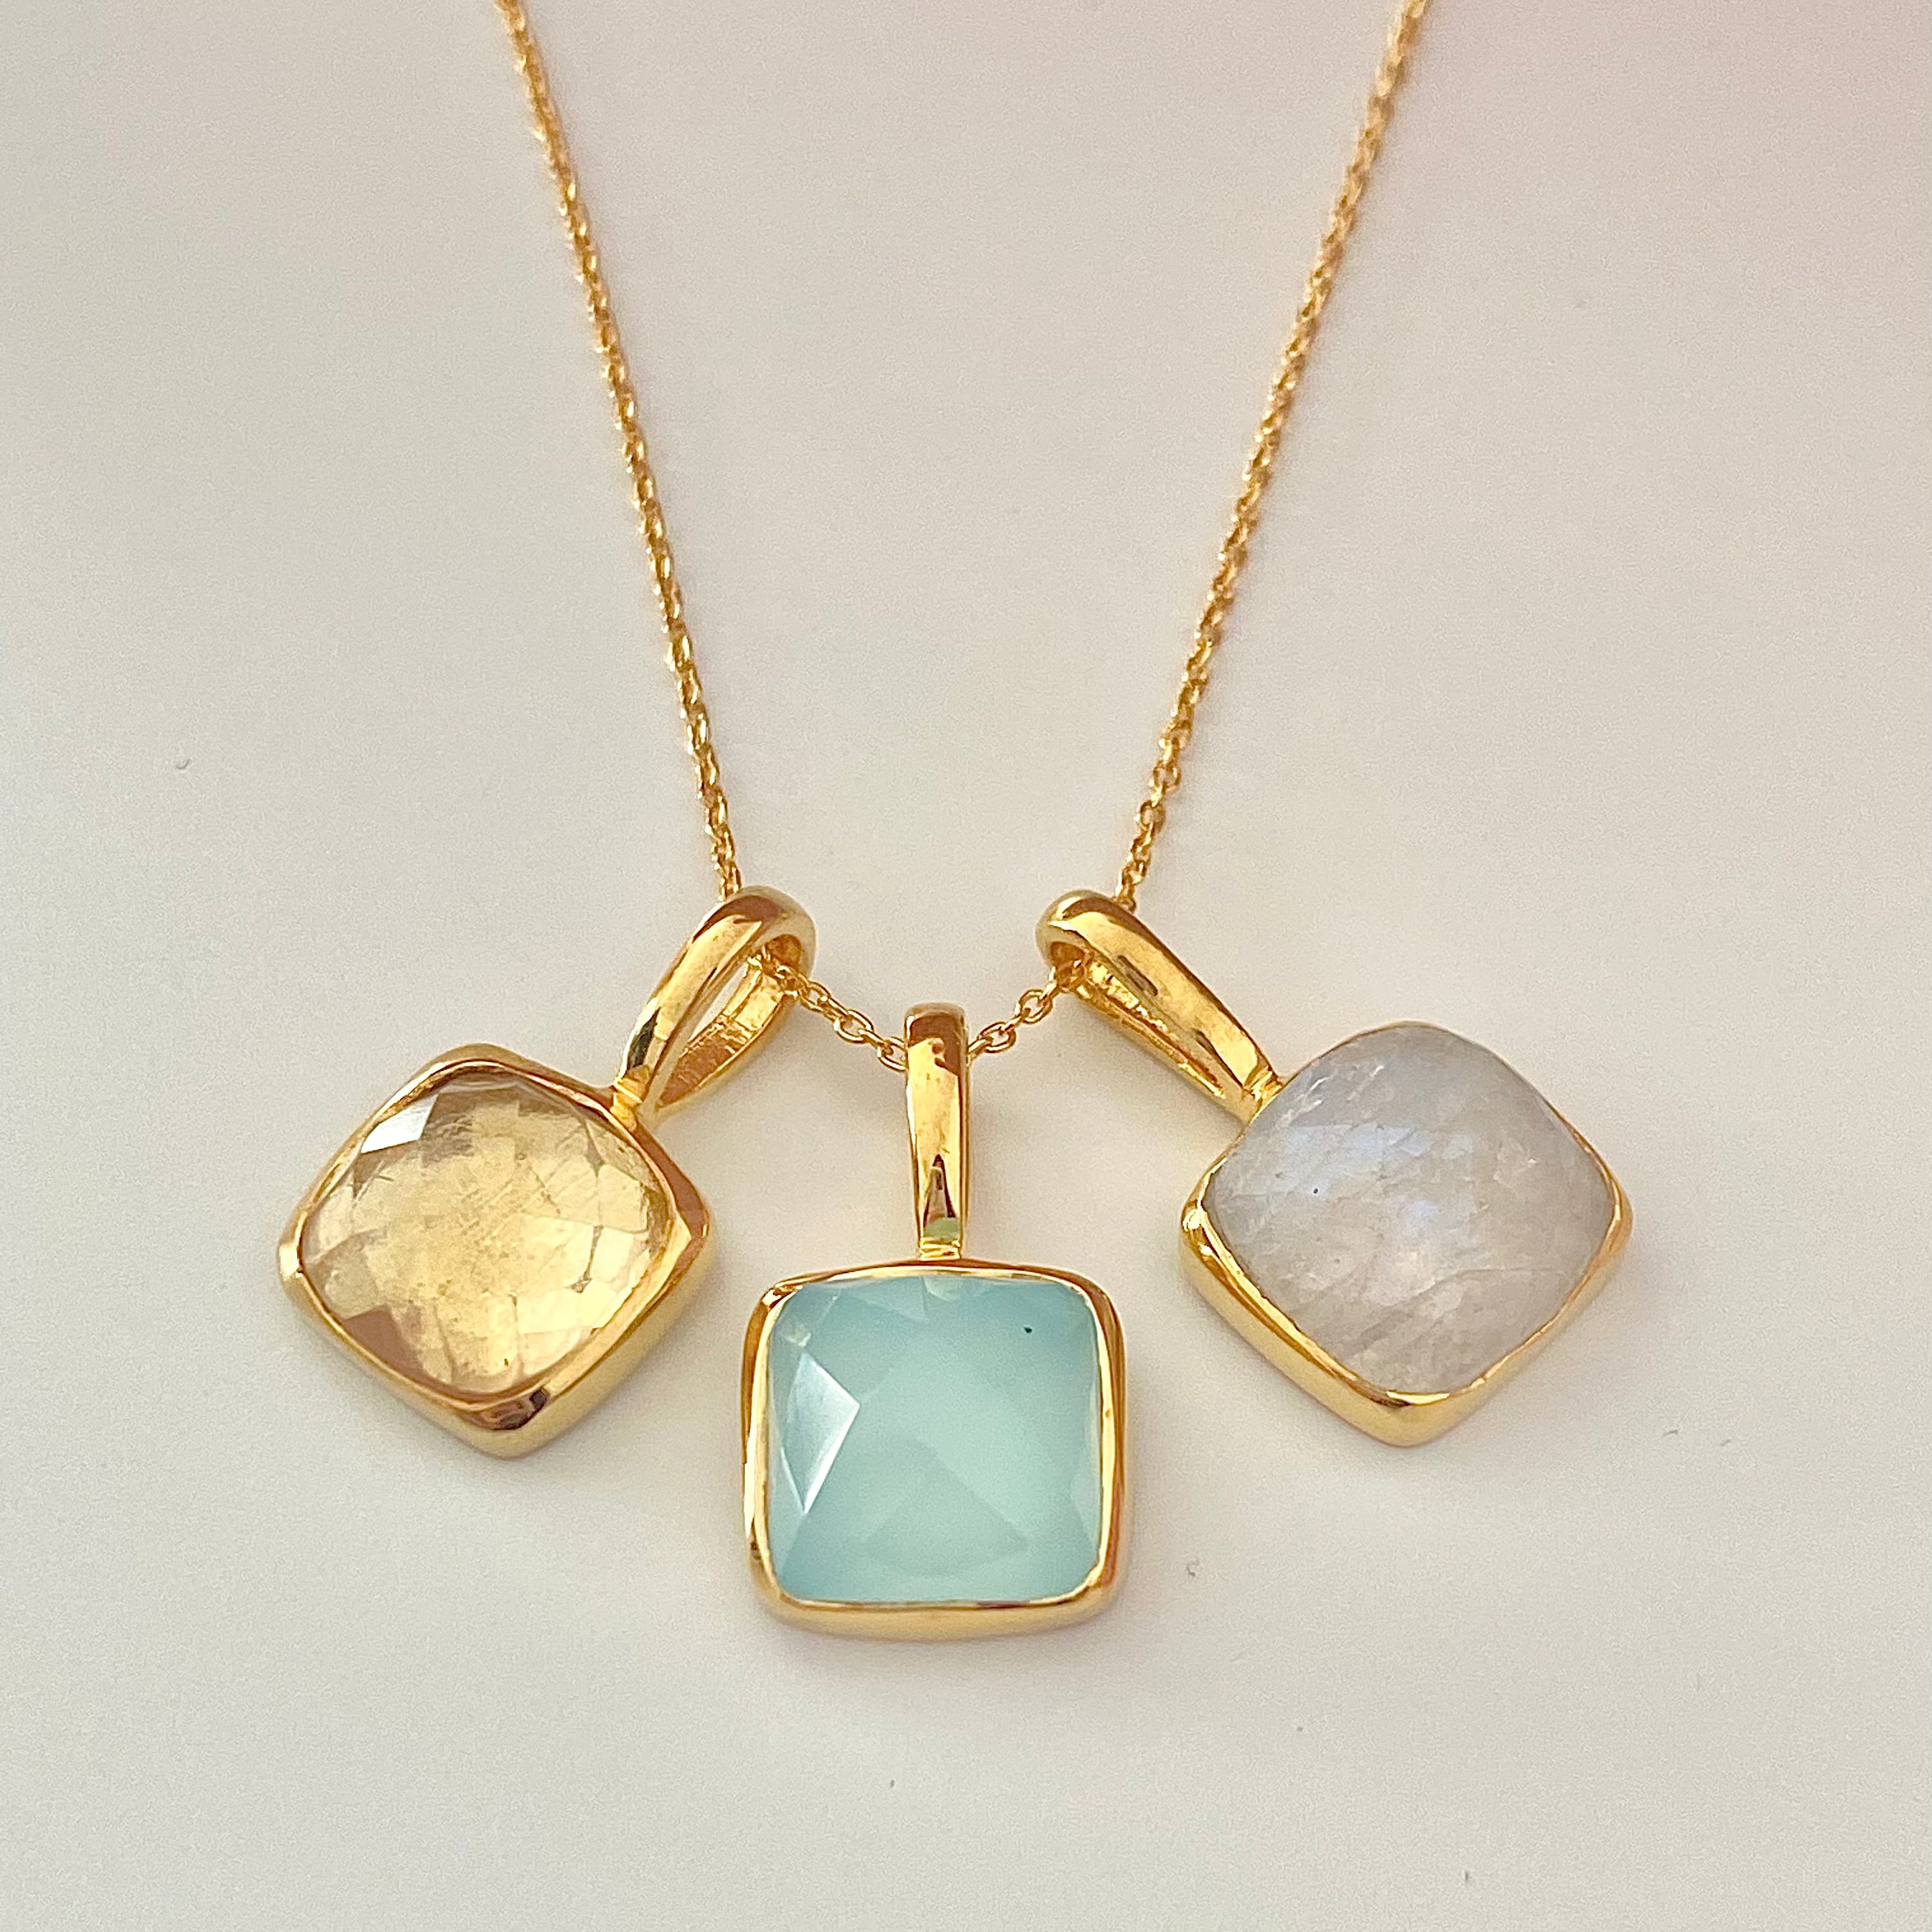 Gold Plated Sterling Silver Pendant Necklace with a Faceted Square Gemstone - Citrine